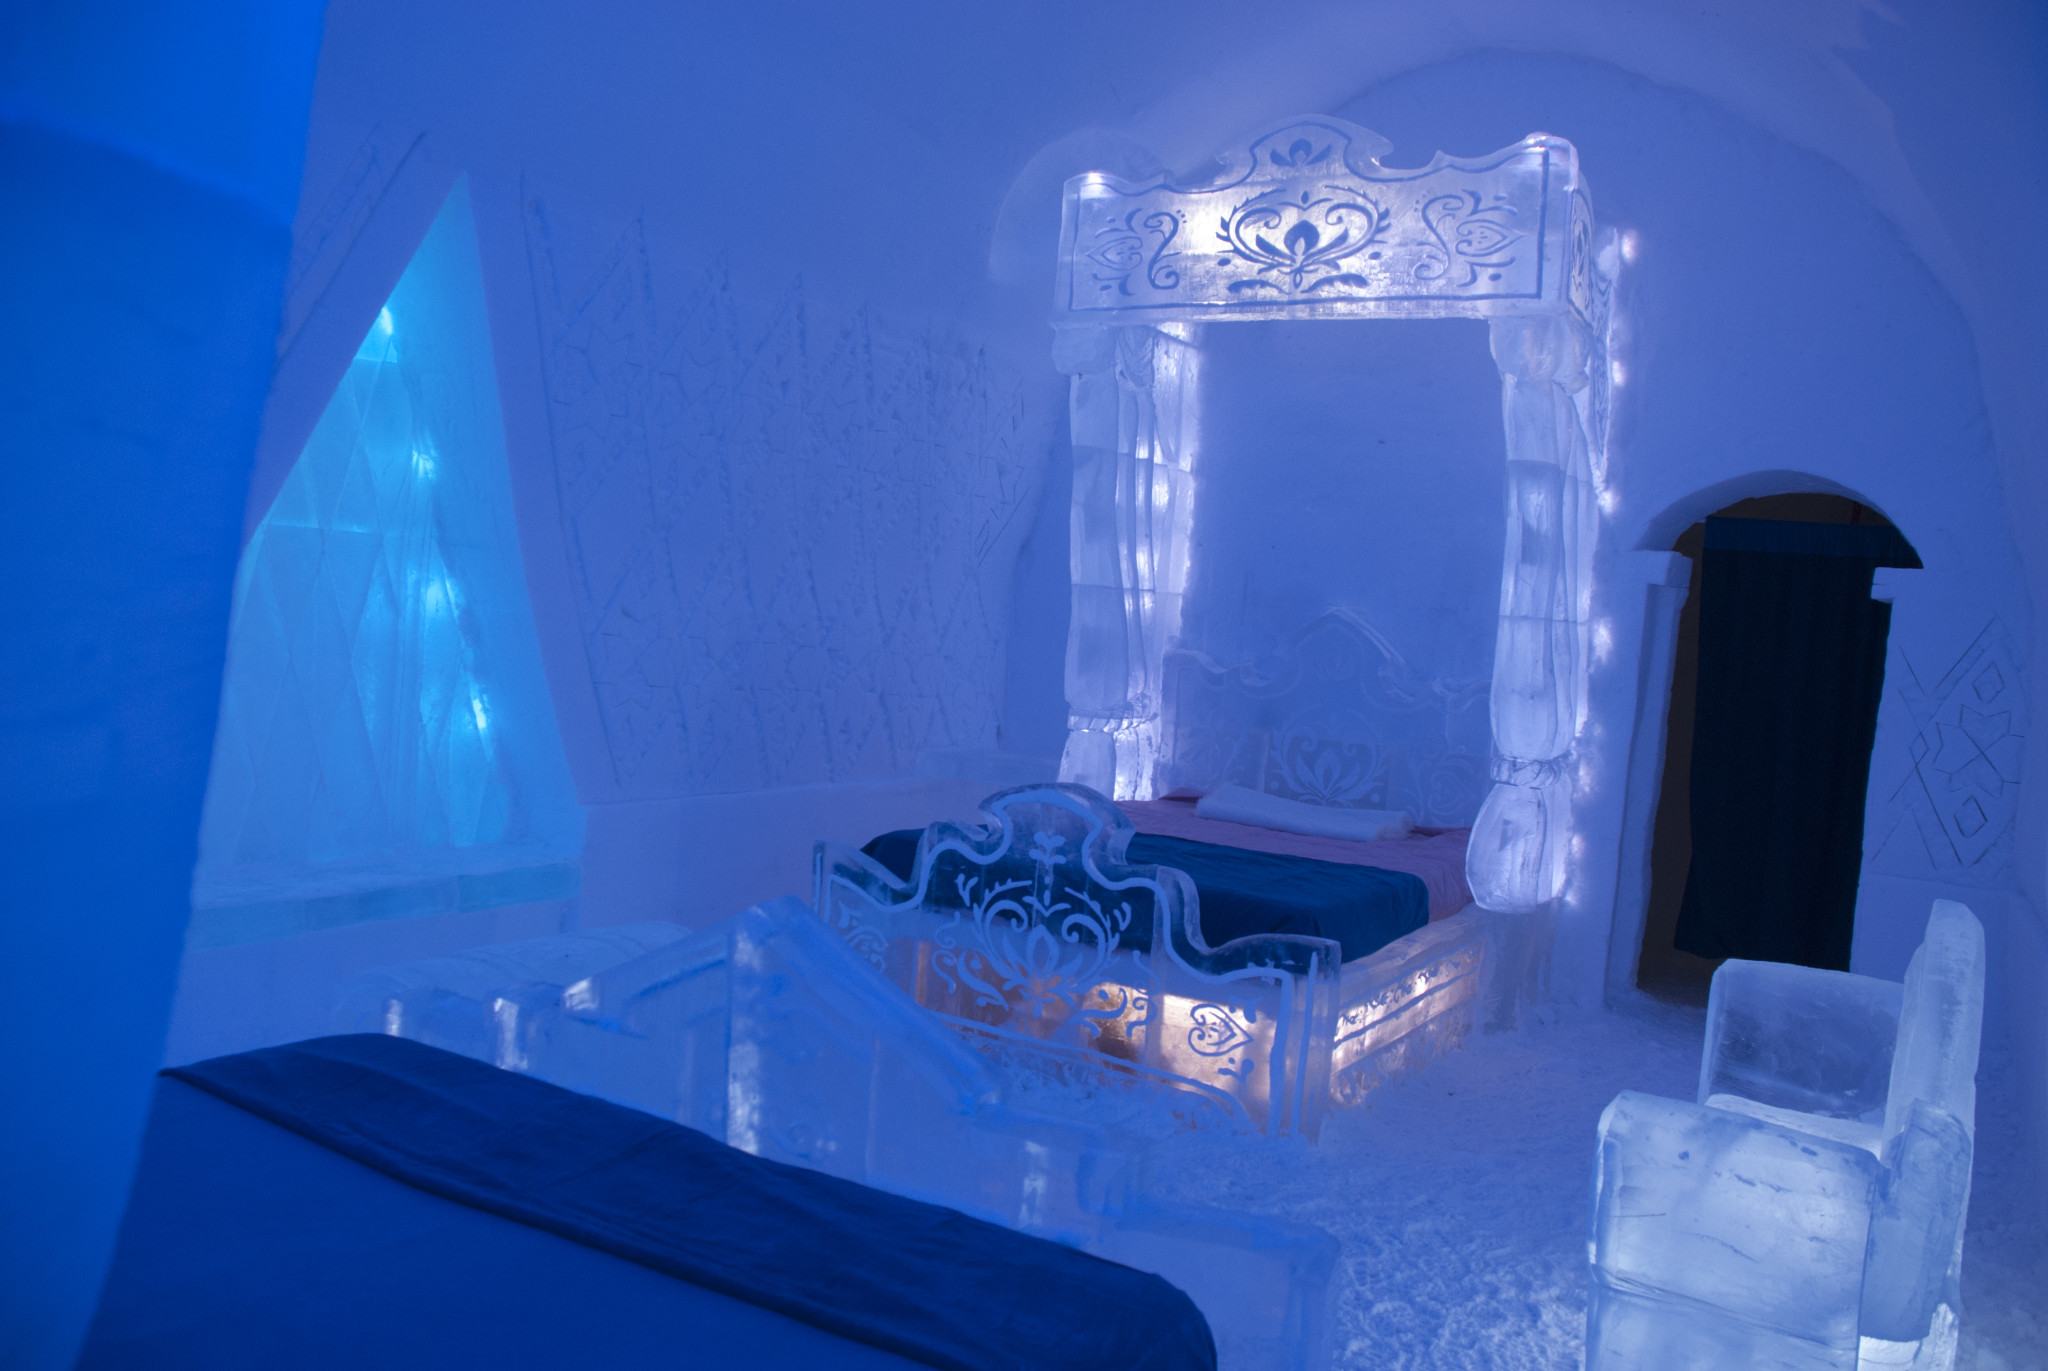 The Makers of “Frozen” Visit The Hotel De Glace